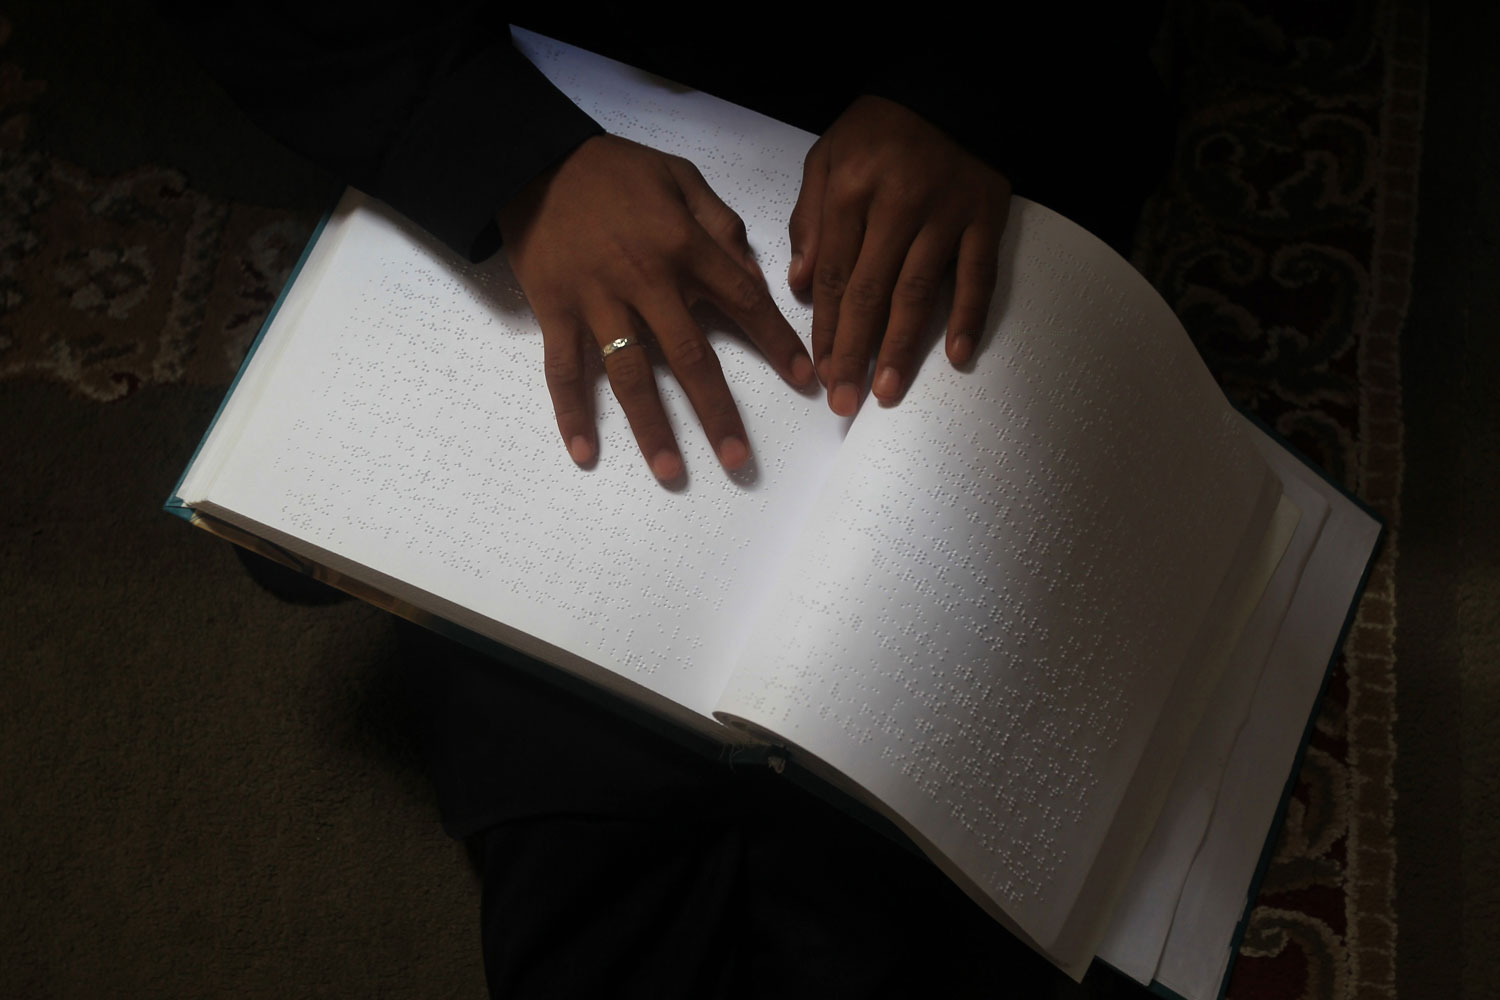 June 11, 2012. A Palestinian girl attends a class on how to read the Koran, Islam's holy book, in braille at a camp in a local mosque in Gaza City.